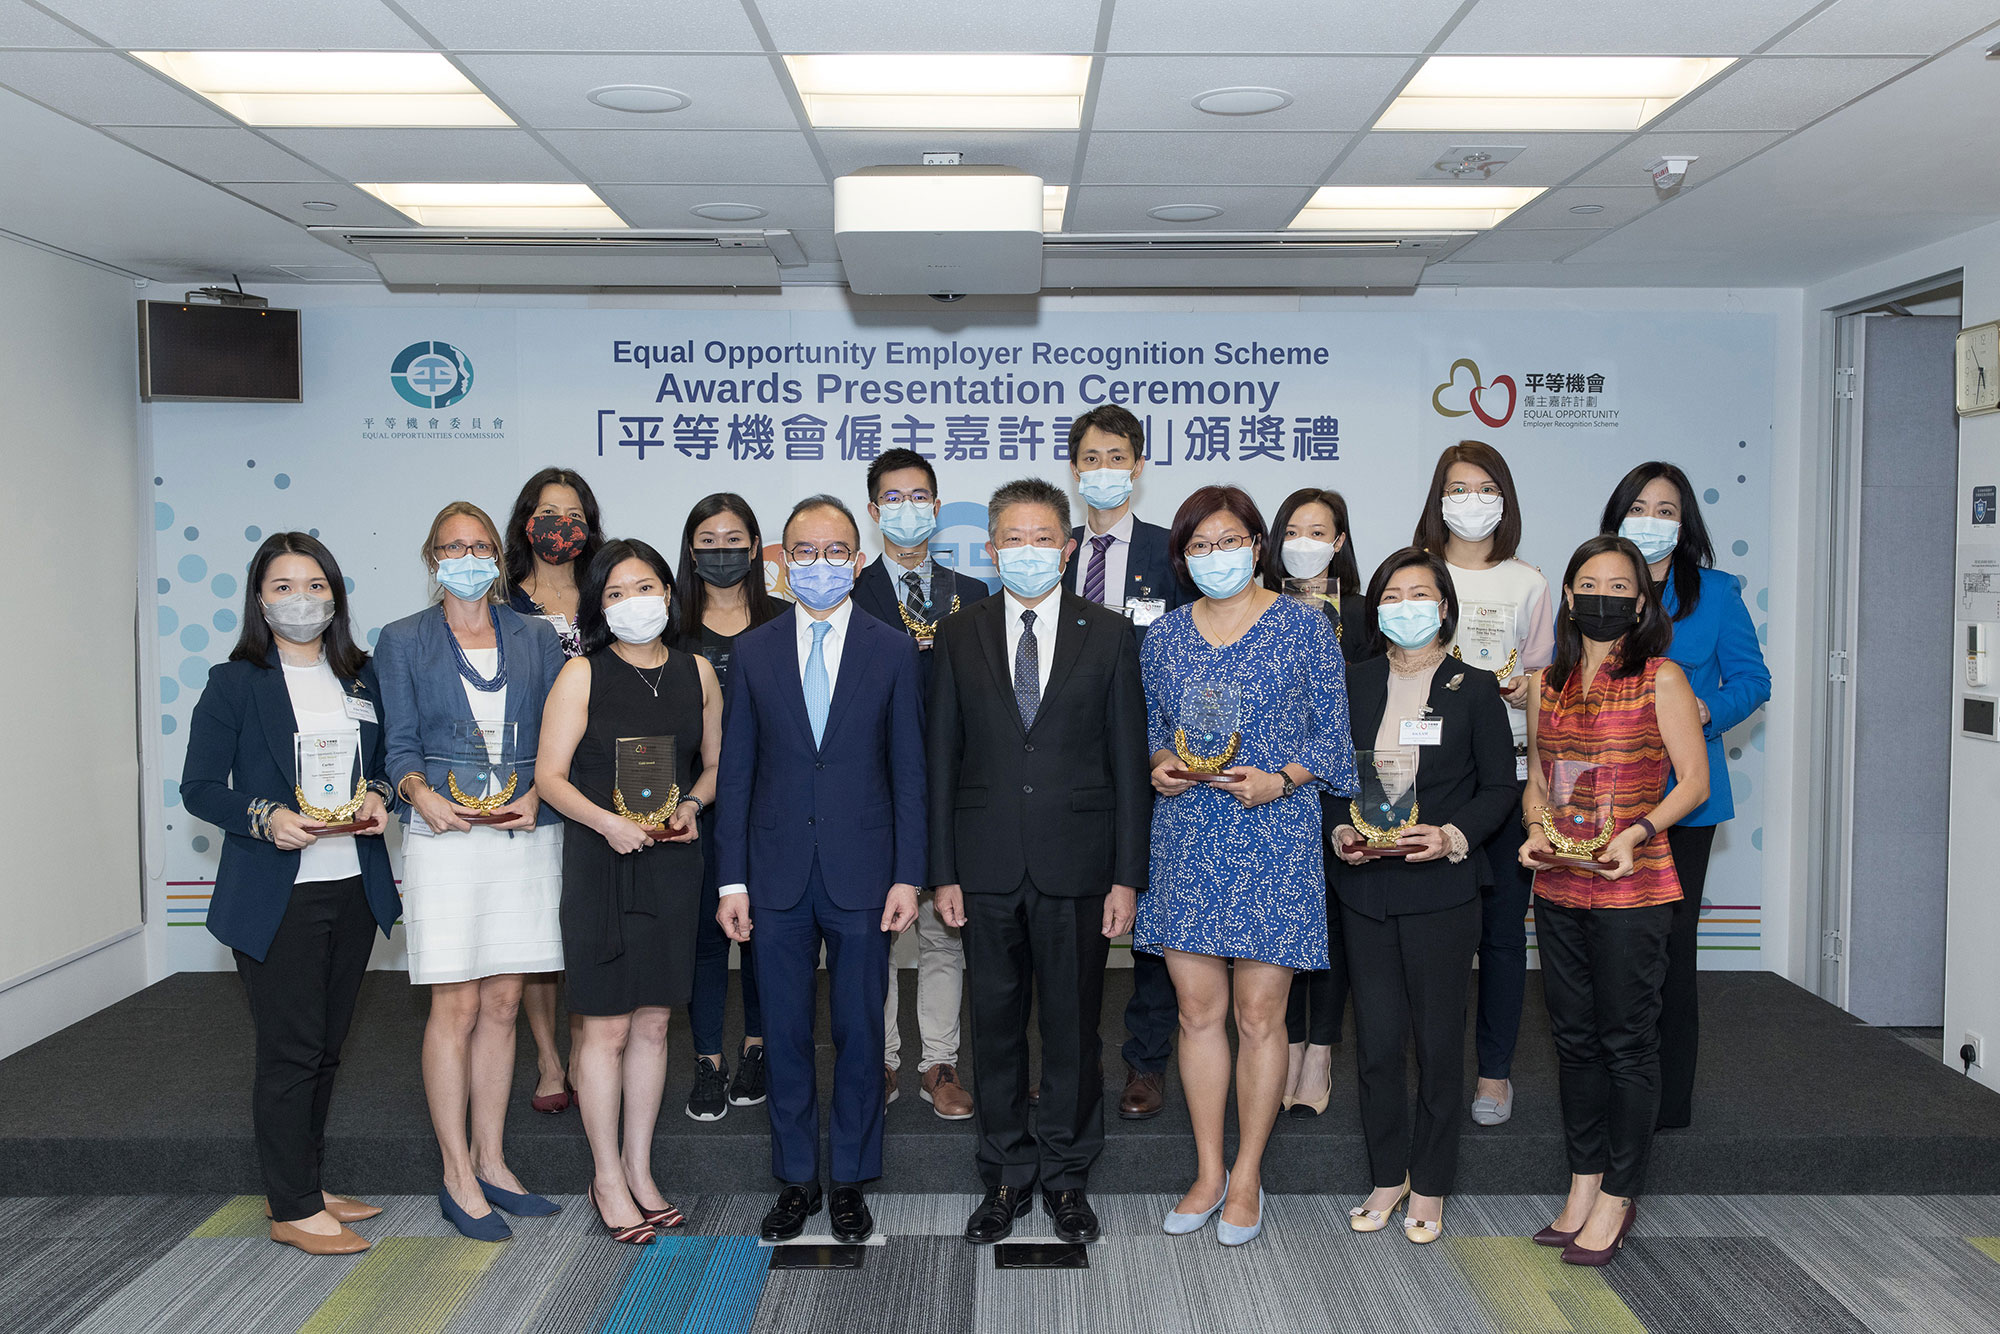 Mr Erick TSANG Kwok-wai, IDSM, JP, Secretary for Constitutional and Mainland Affairs (front row, fourth left) and Mr Ricky CHU Man-kin, IDS, Chairperson of the EOC (front row, fourth right) join in a group photo with awardees of the Equal Opportunity Employer Gold Award.